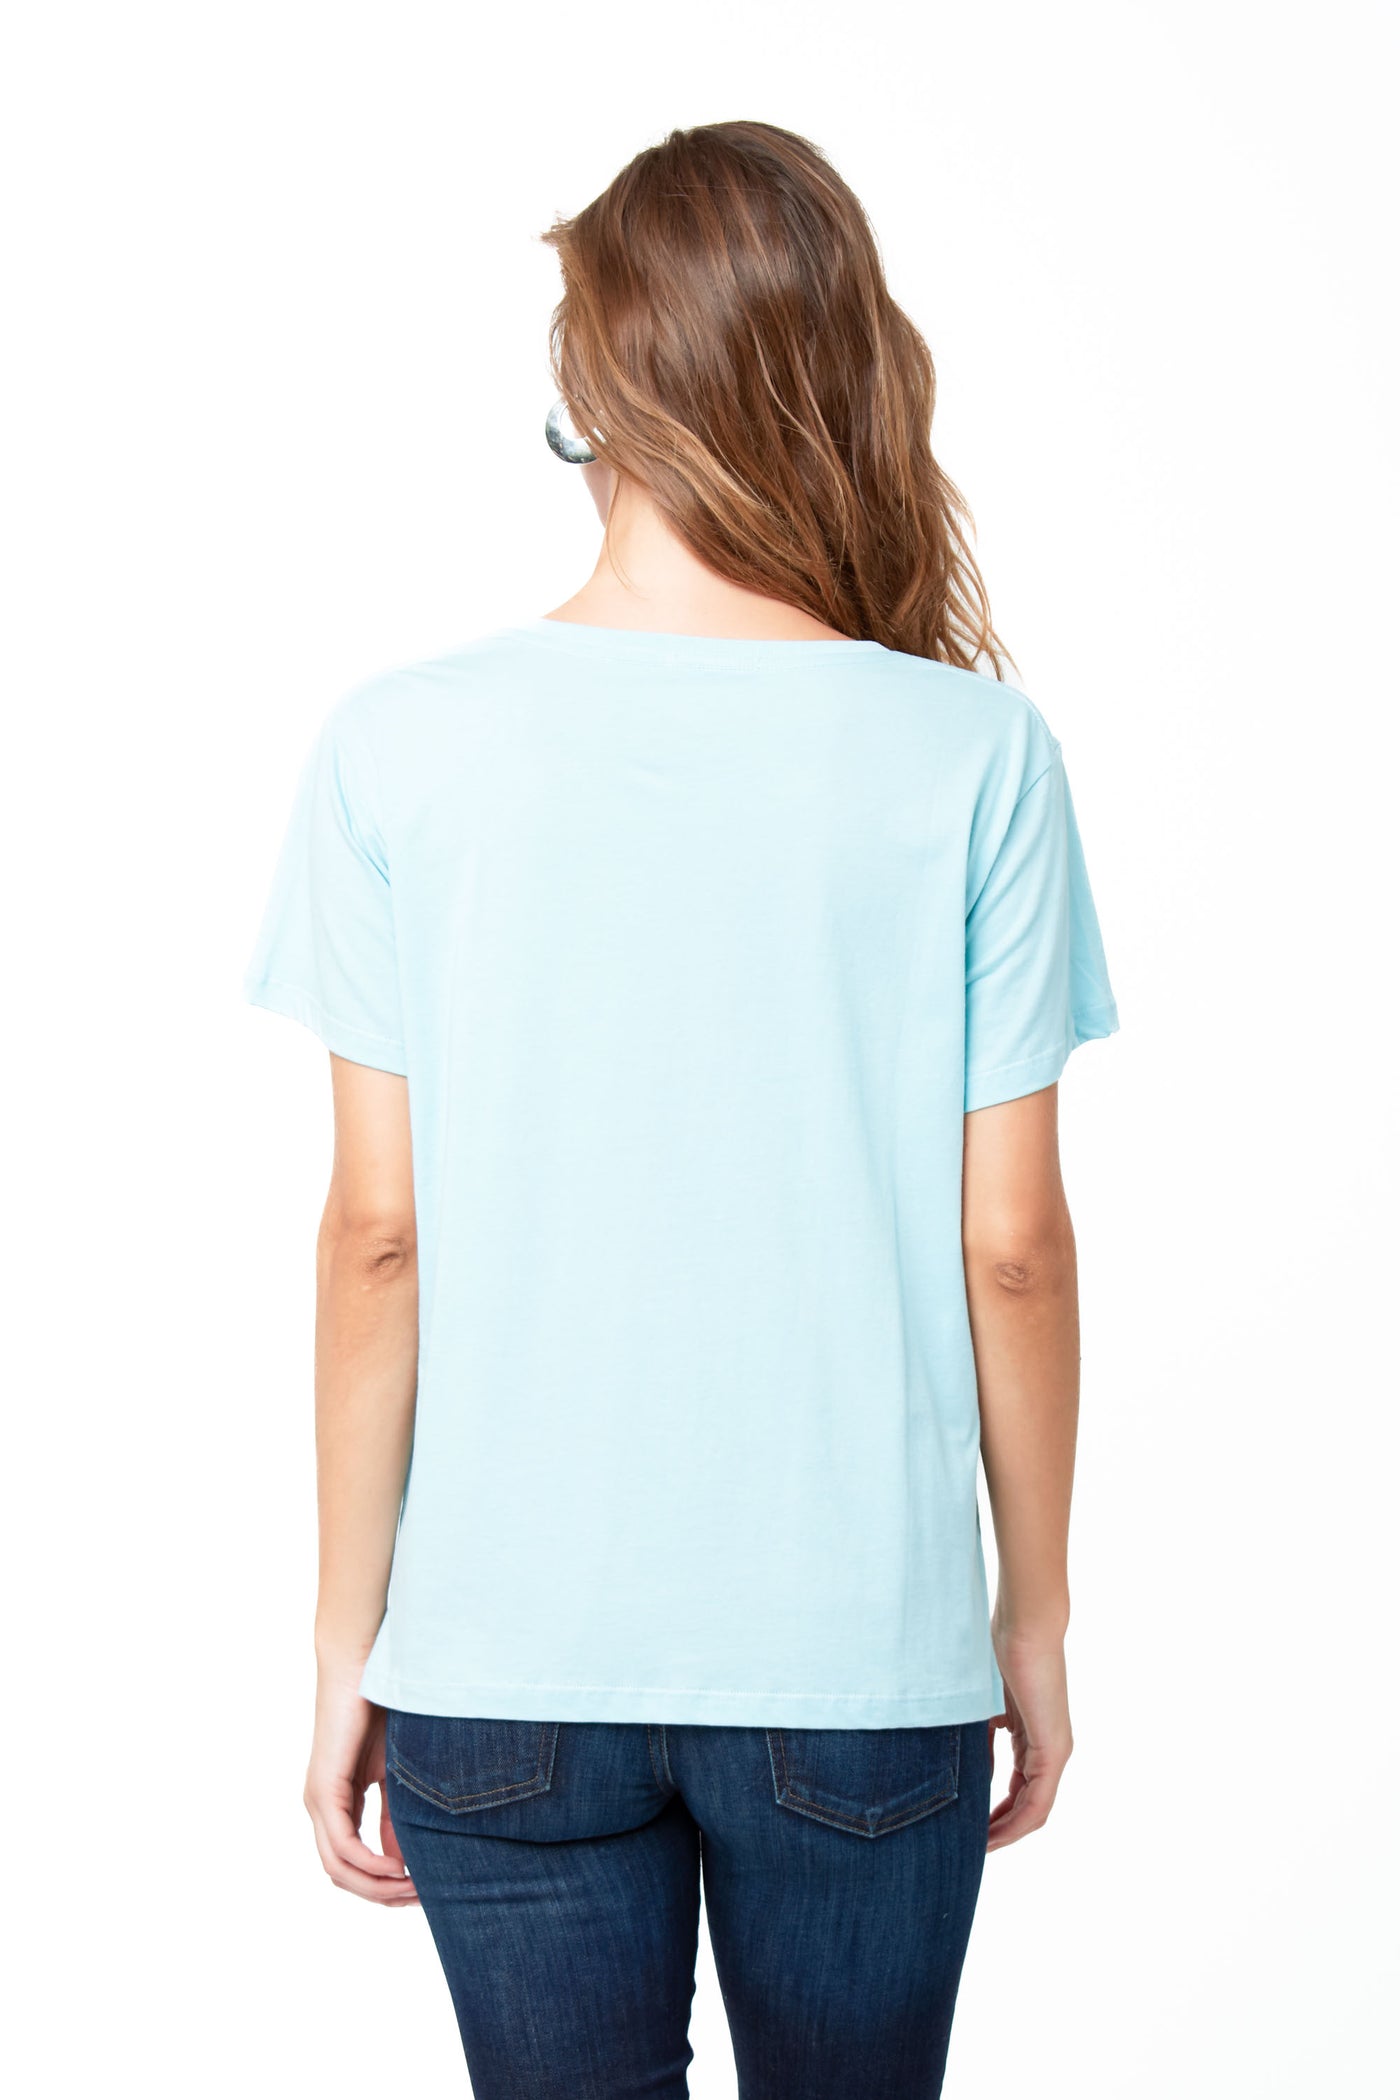 MADISON TEE - STERLING BLUE OLD SCHOOL